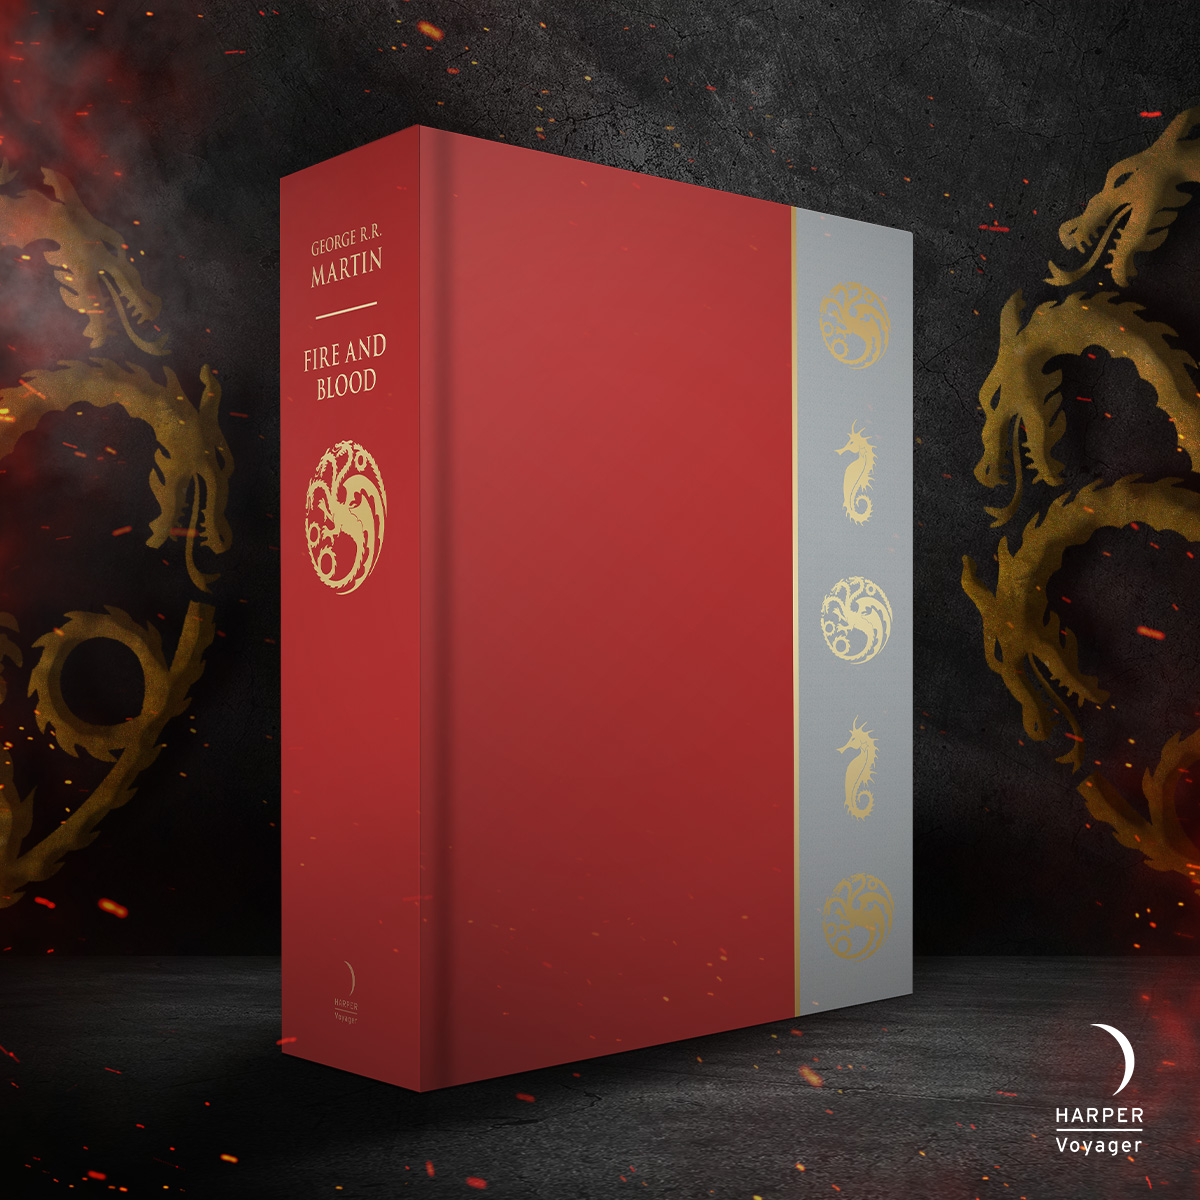 In anticipation of the upcoming season of House of the Dragon, we're thrilled to unveil a limited deluxe slipcase edition of #FireAndBlood! Gold foil, stunning endpapers and illustrations throughout, your bookshelf needs this Available to pre-order now: smarturl.it/fabs